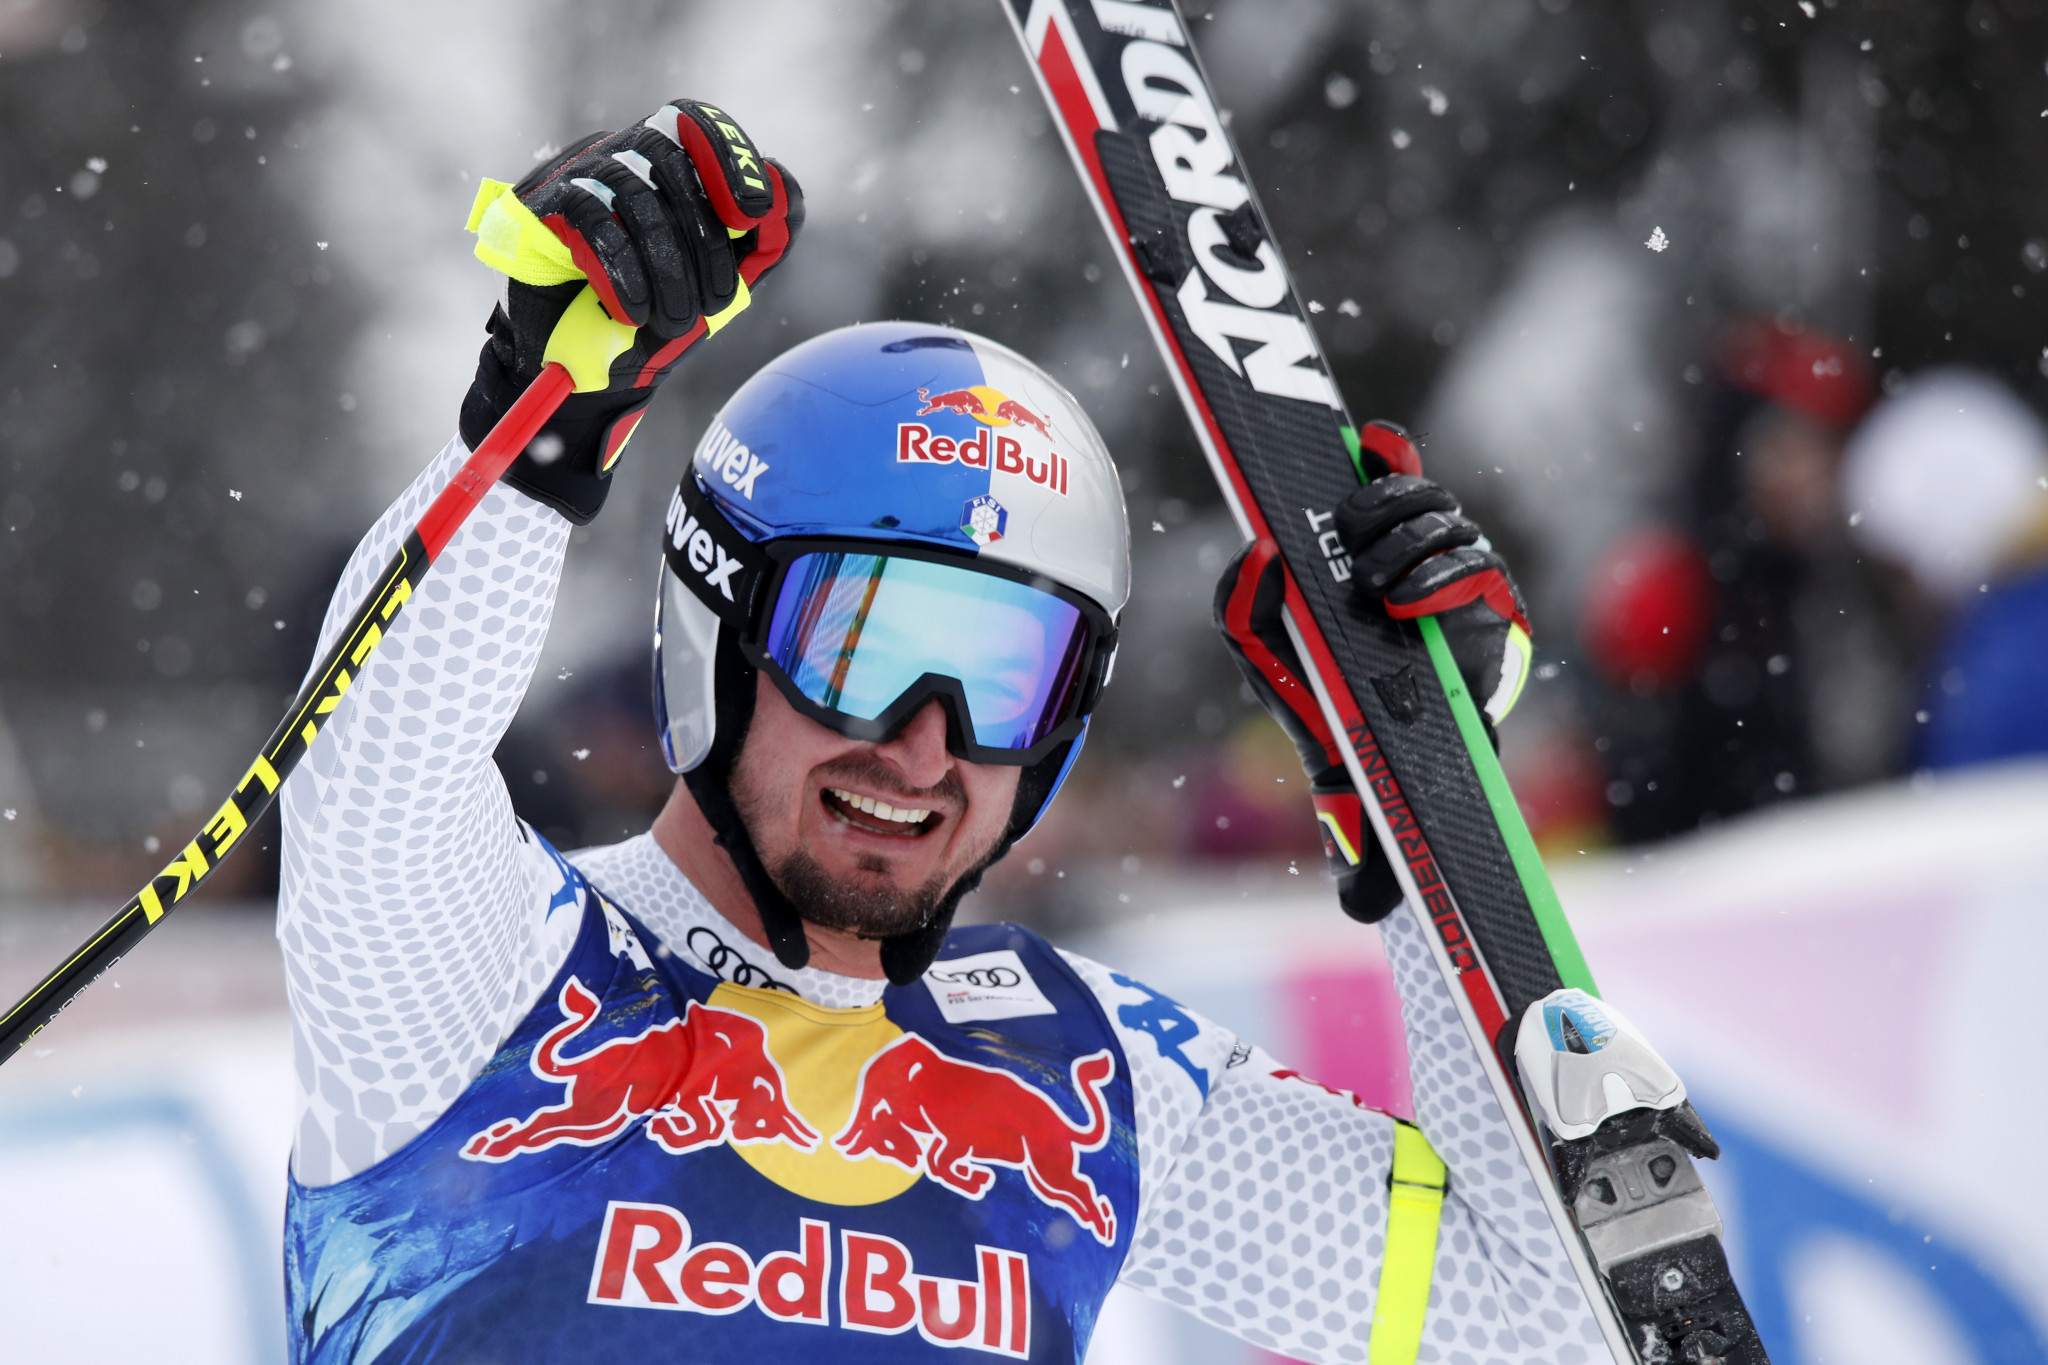 Paris claims third downhill success at FIS Alpine Skiing World Cup in Kitzbühel